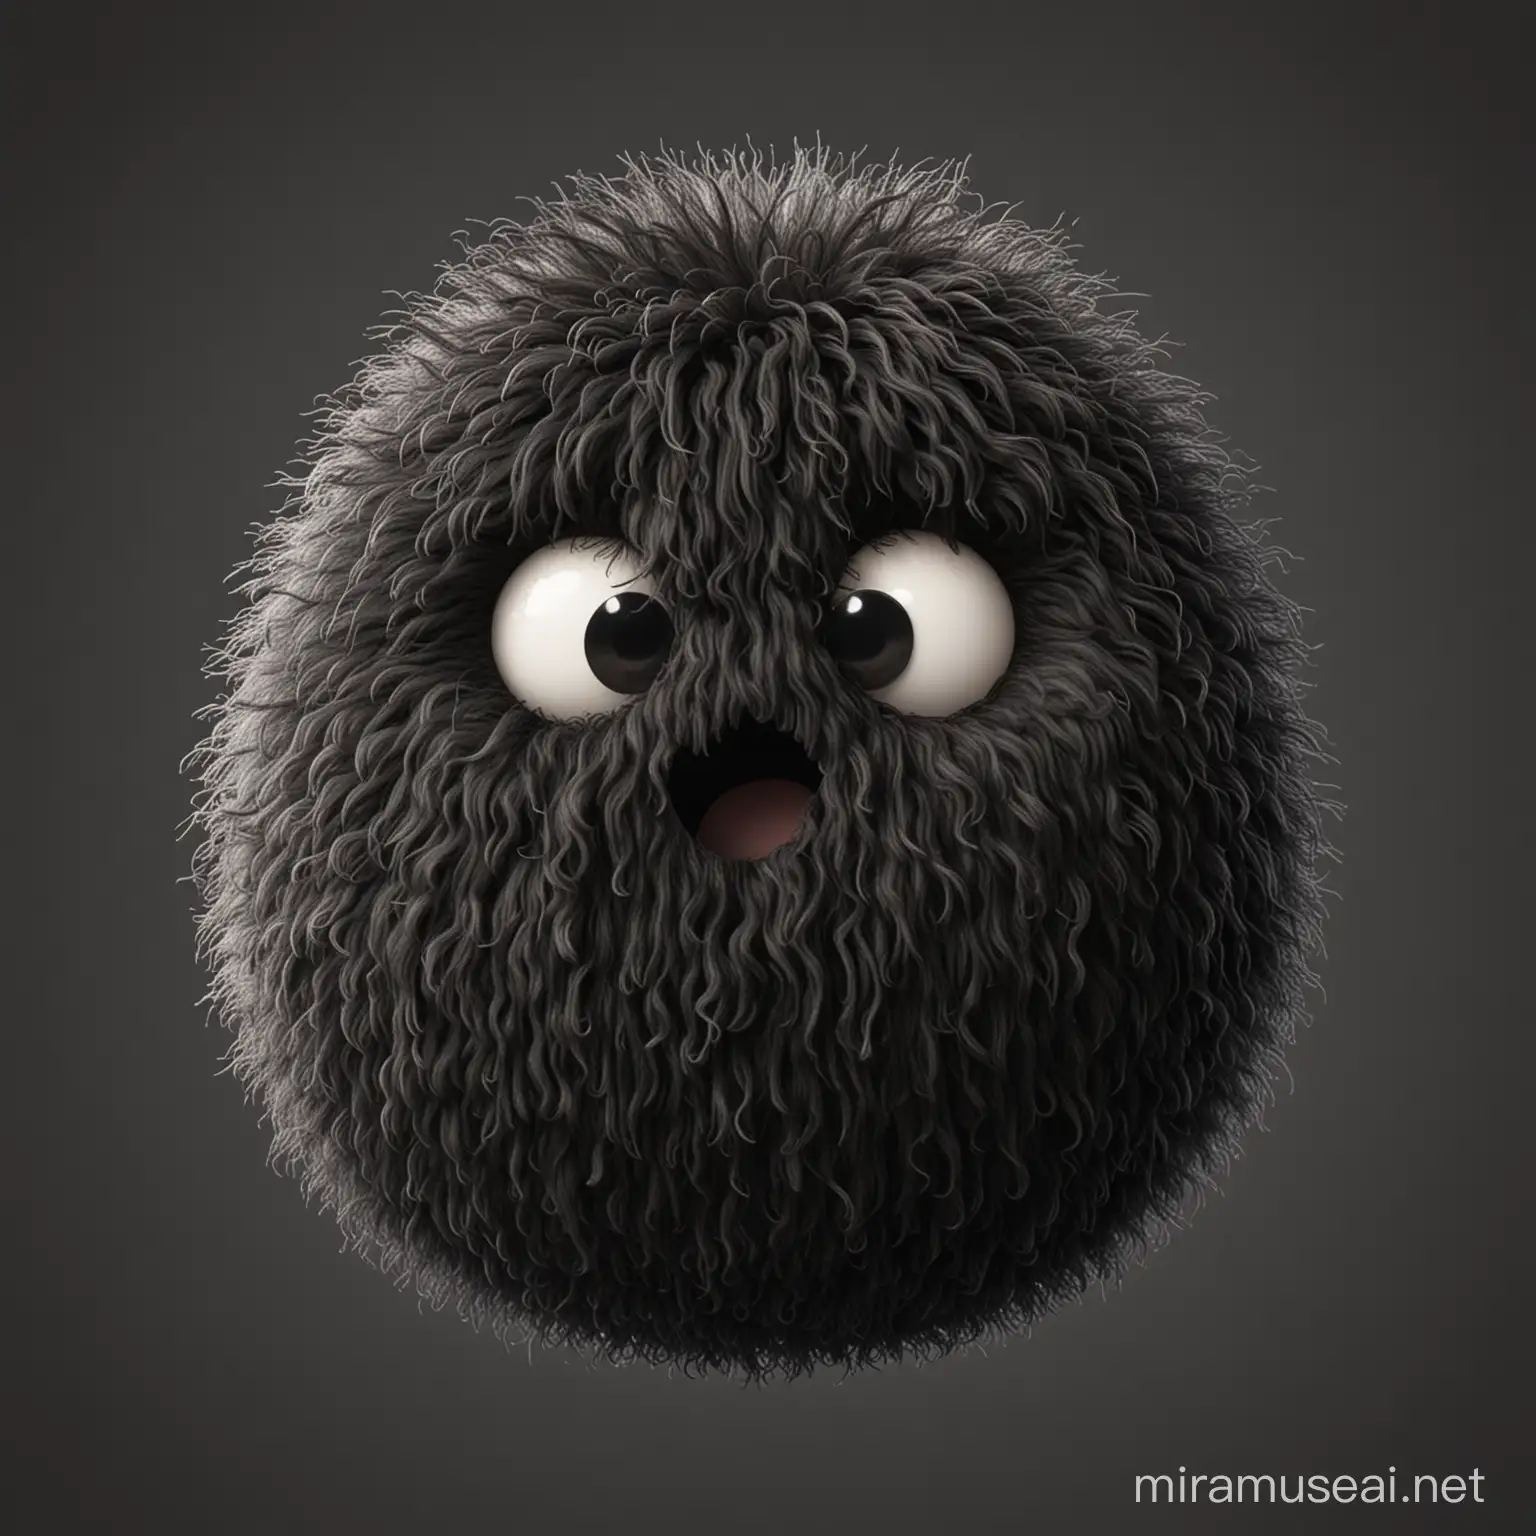 Adorable Black Furry Blob Inspired by Susuwatari from Spirited Away